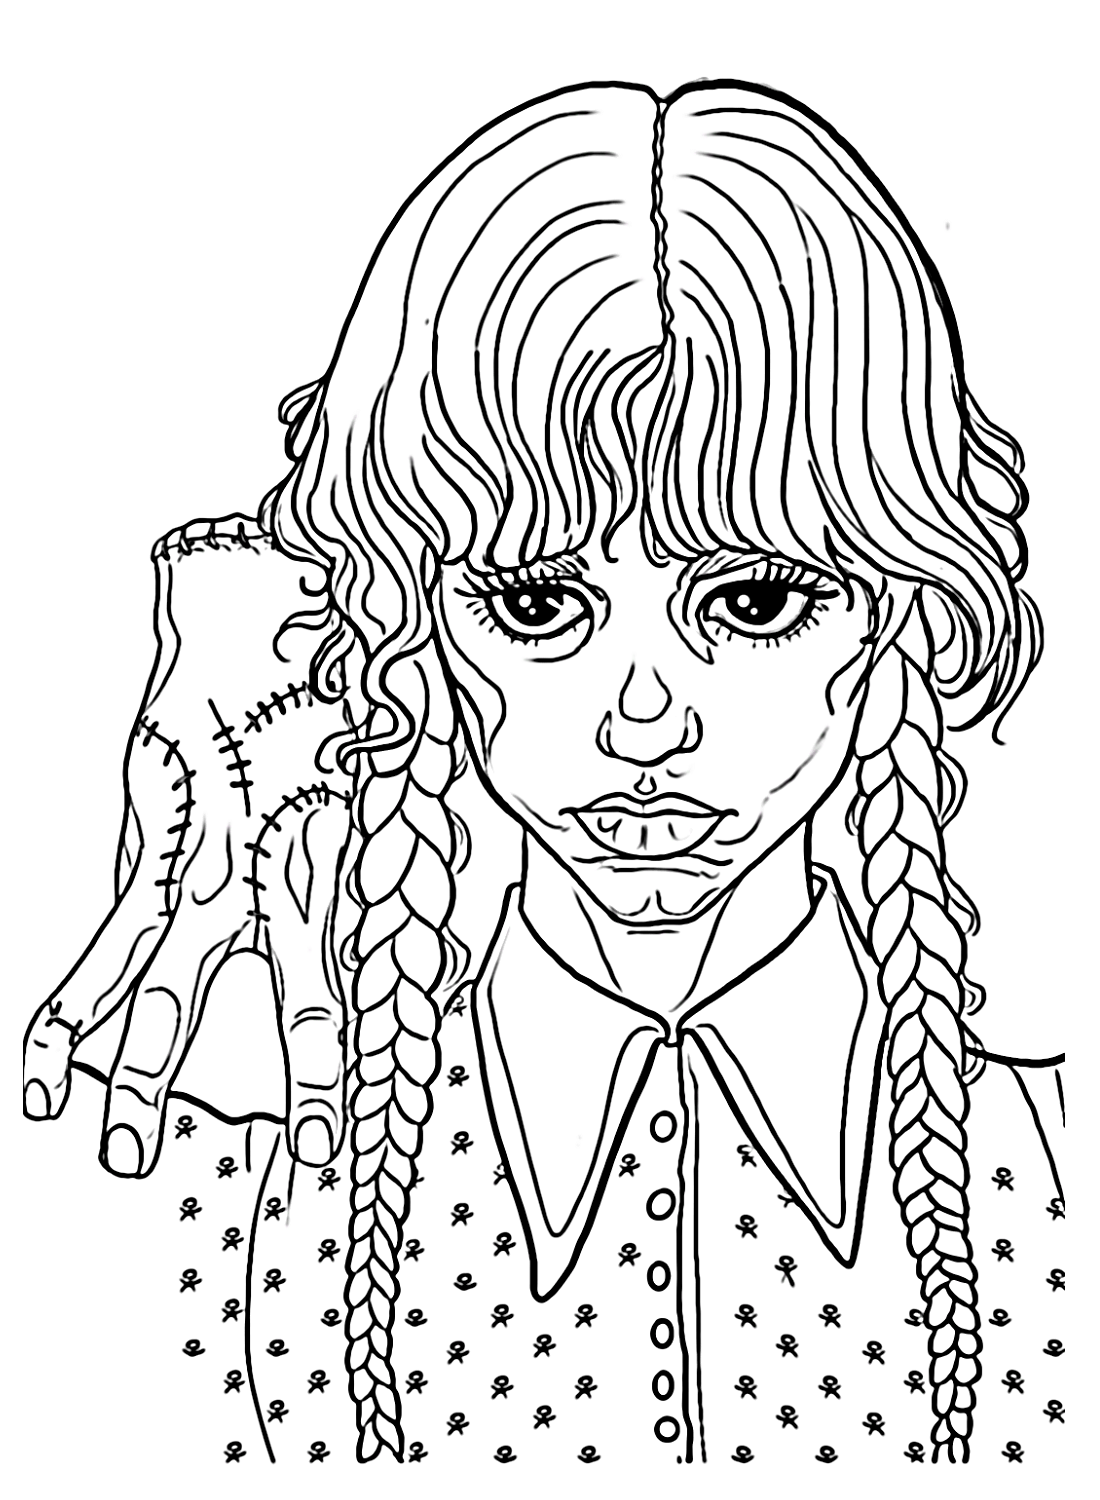 Wednesday Addams with Thing Coloring Pages - Wednesday Coloring Pages - Coloring  Pages For Kids And Adults